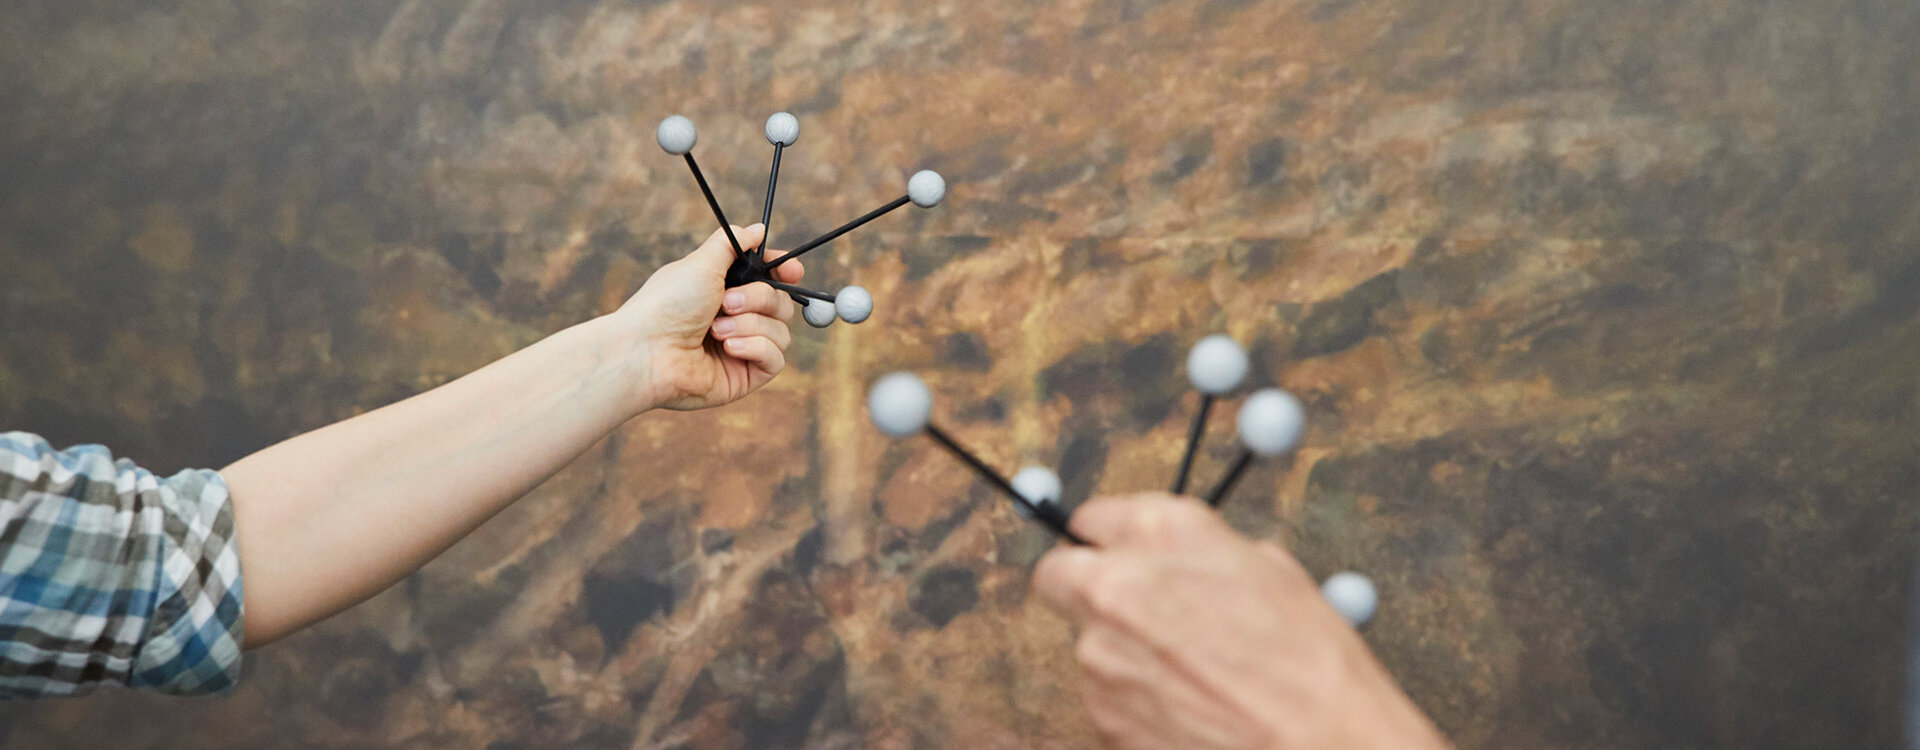 Molecule models are held up by two hands